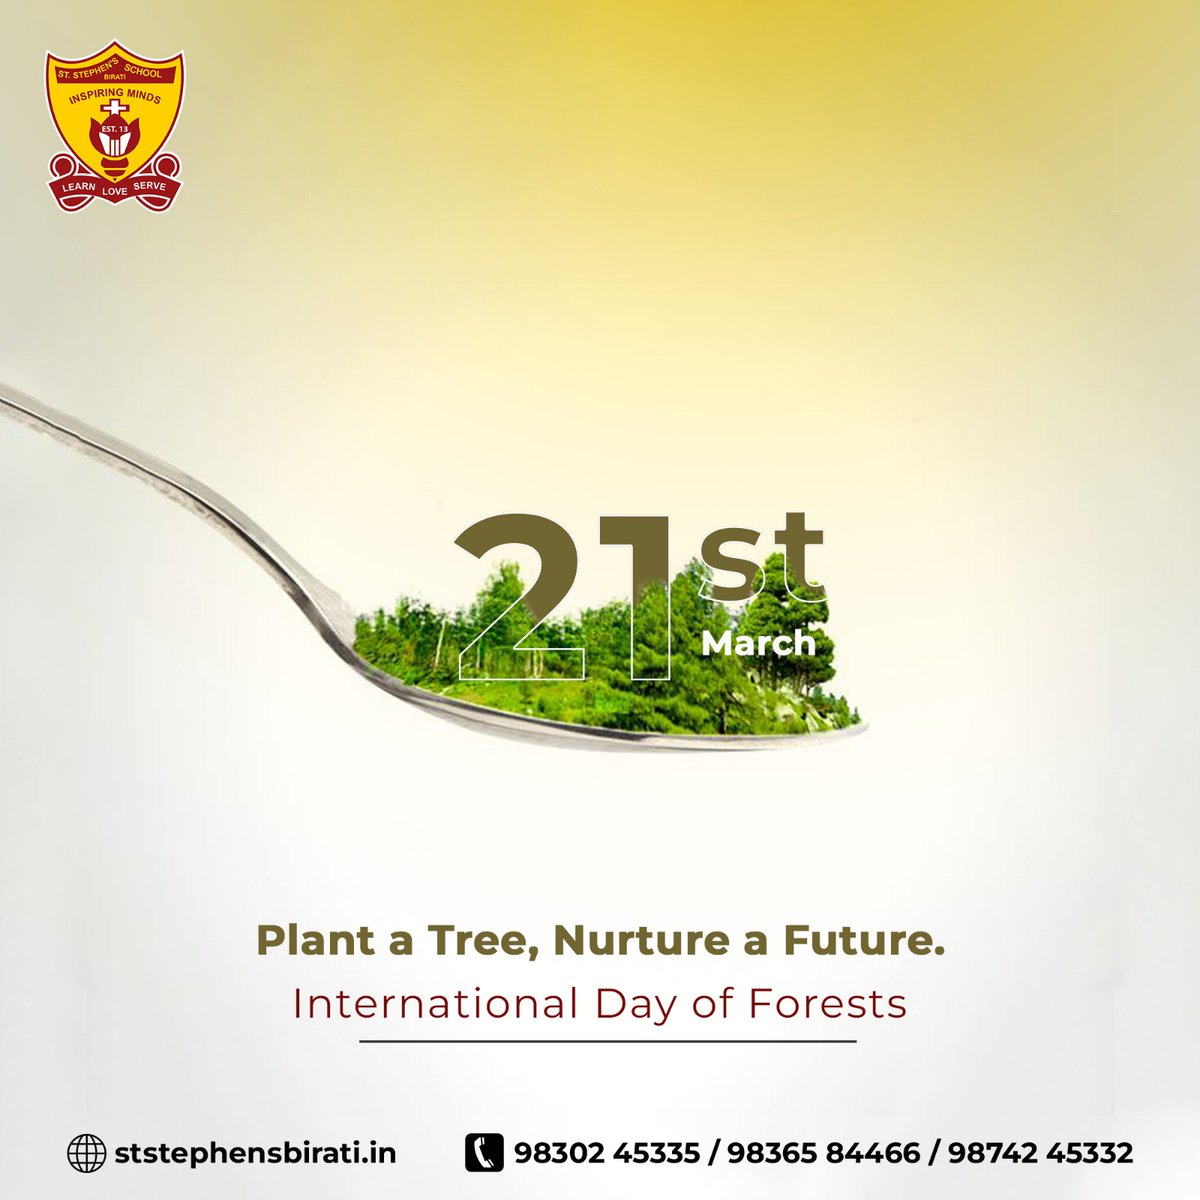 Let's plant a tree today to nurture a greener future for future generations. Together, we can make a difference! #StStephensSchool #StStephensSchoolBirati #InternationalDayofForests #GreenFuture #ForestDay